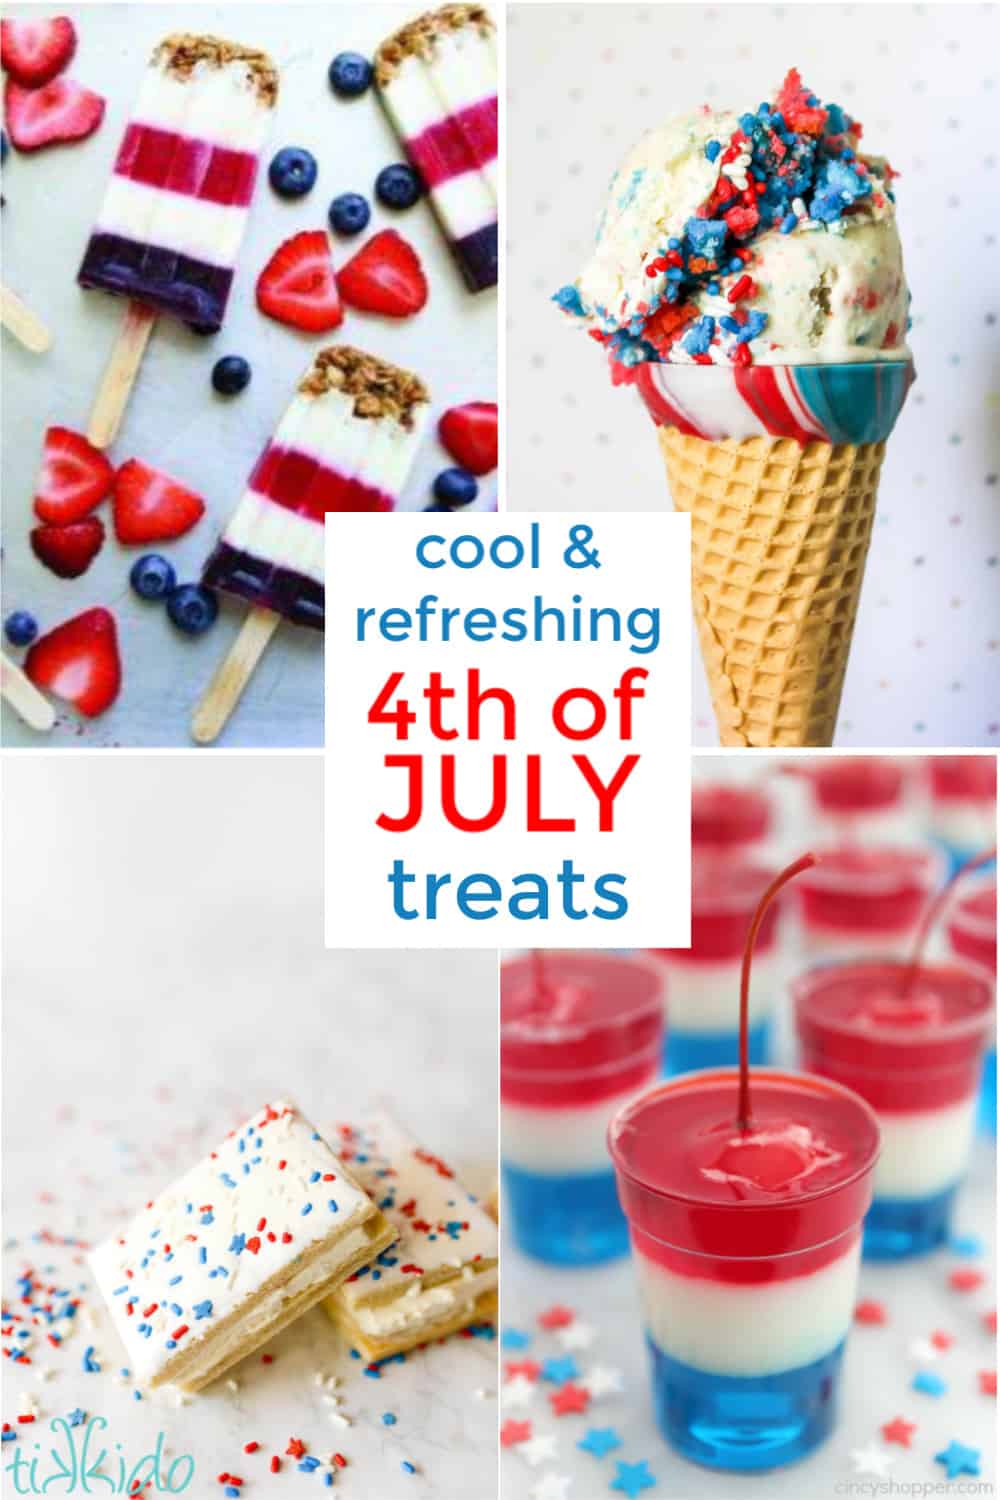 Cool & Refreshing 4th of July Treats